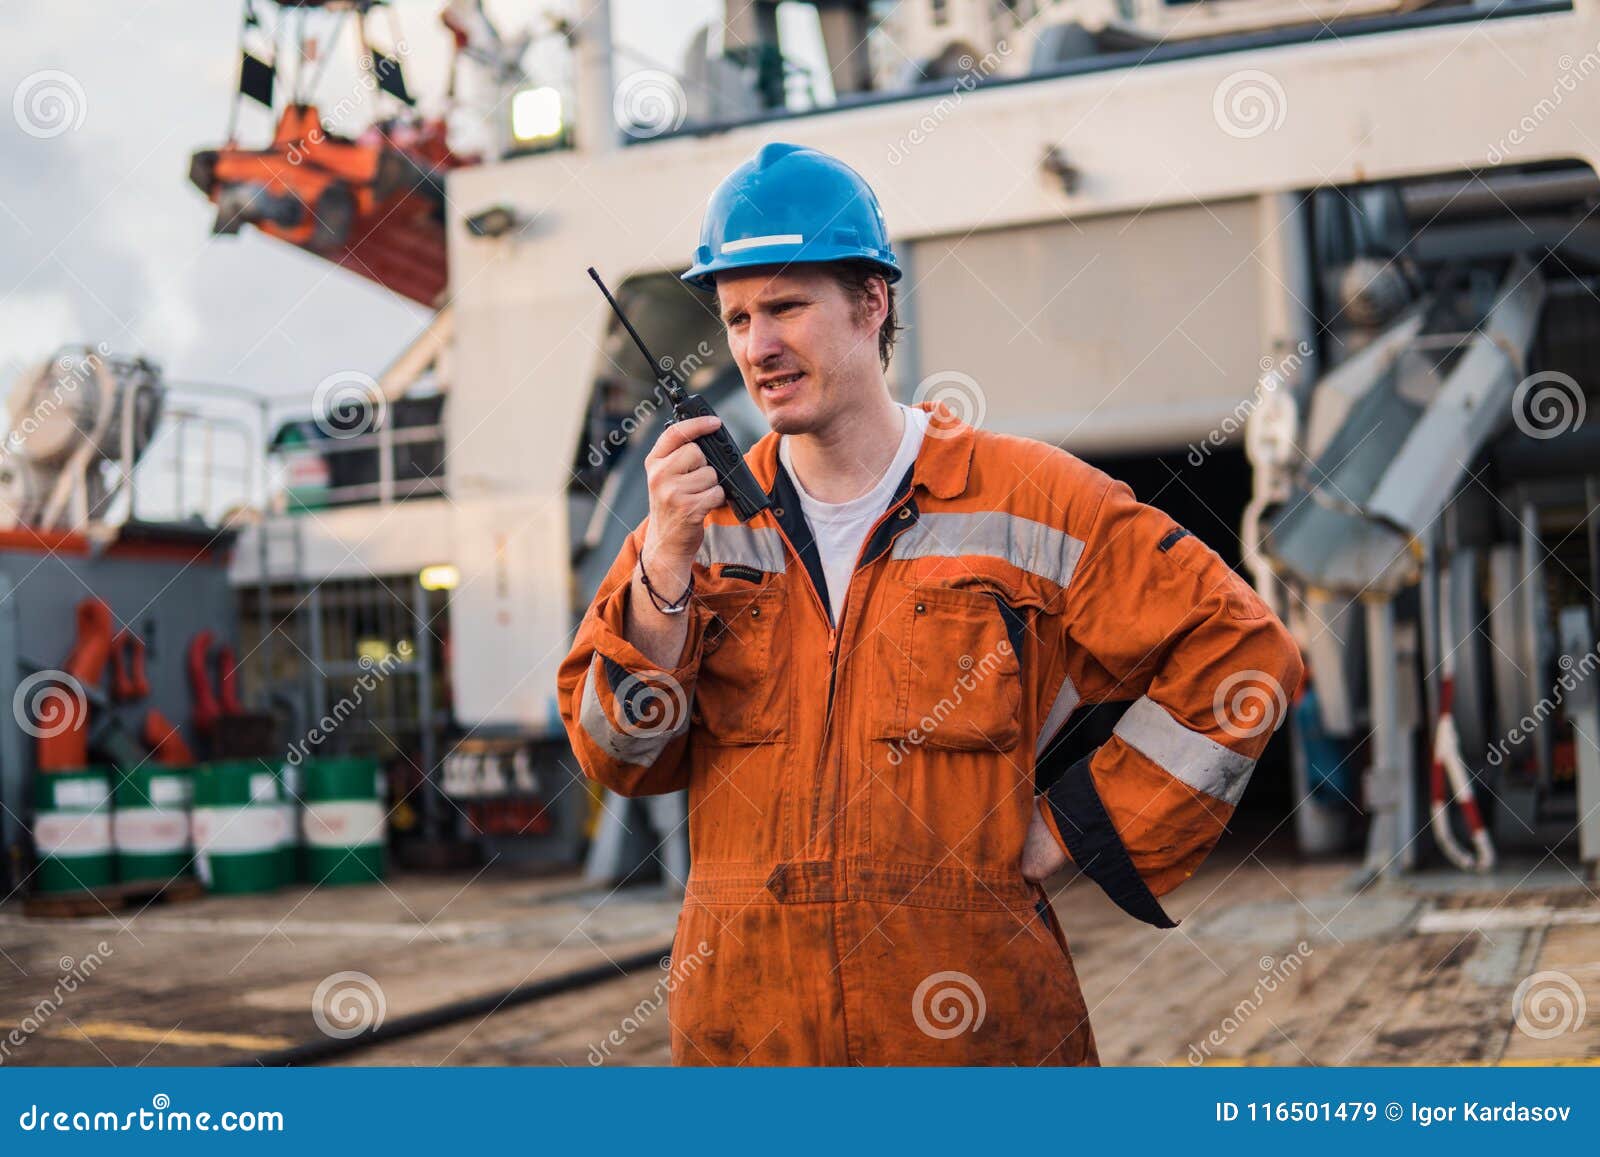 marine deck officer or chief mate on deck of ship with vhf radio